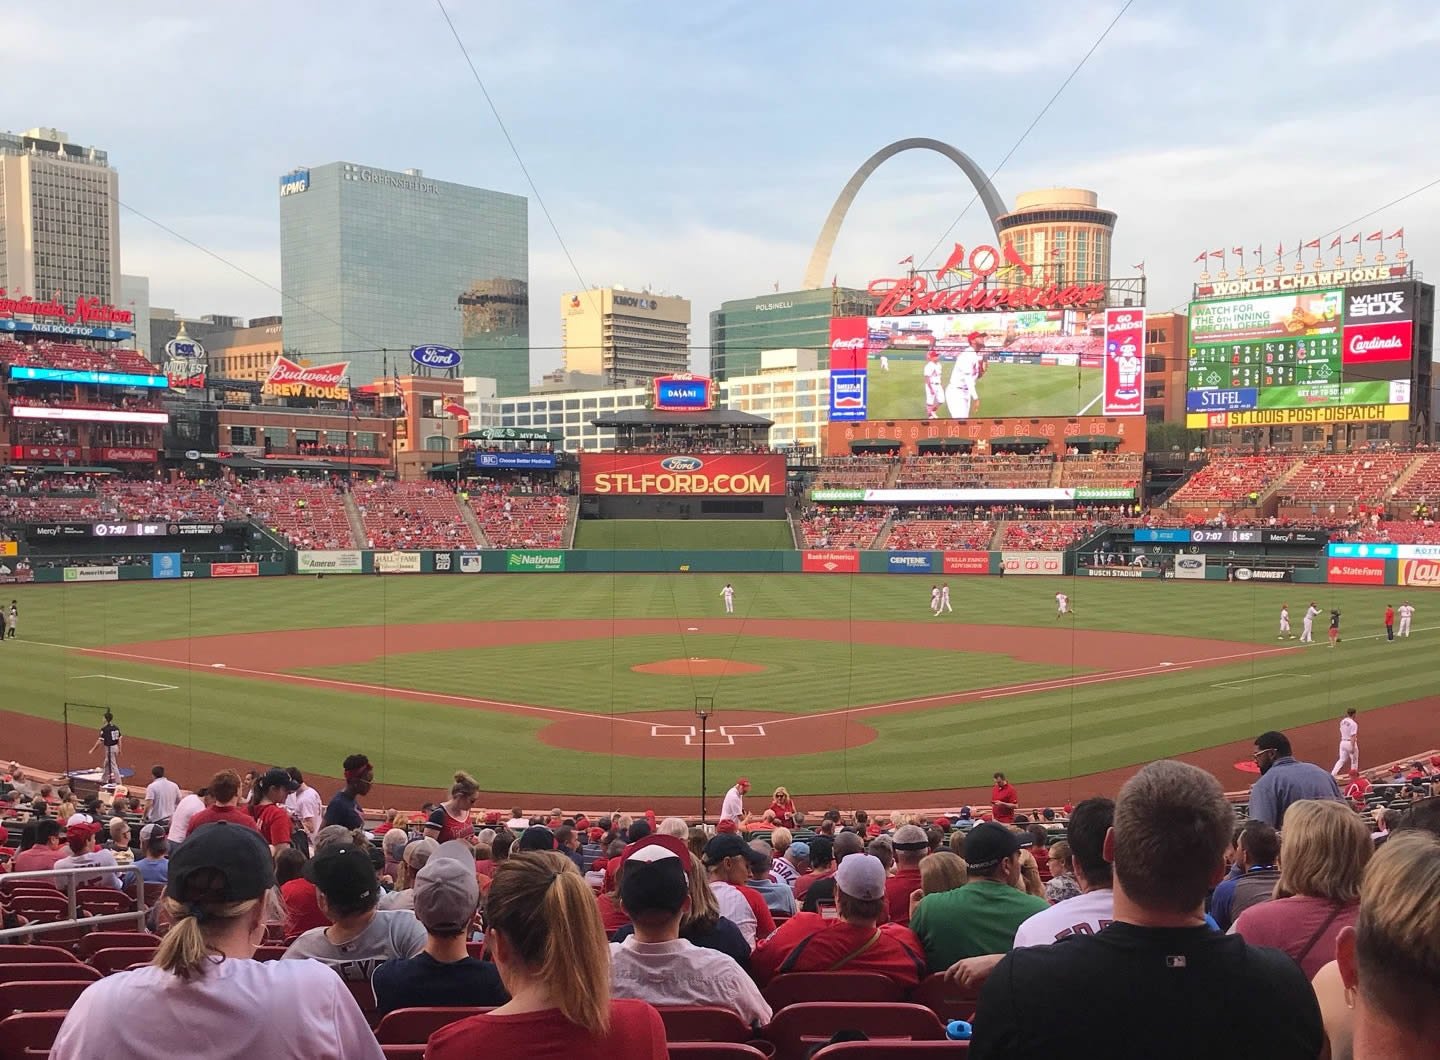 section 150, row 24 seat view  - busch stadium